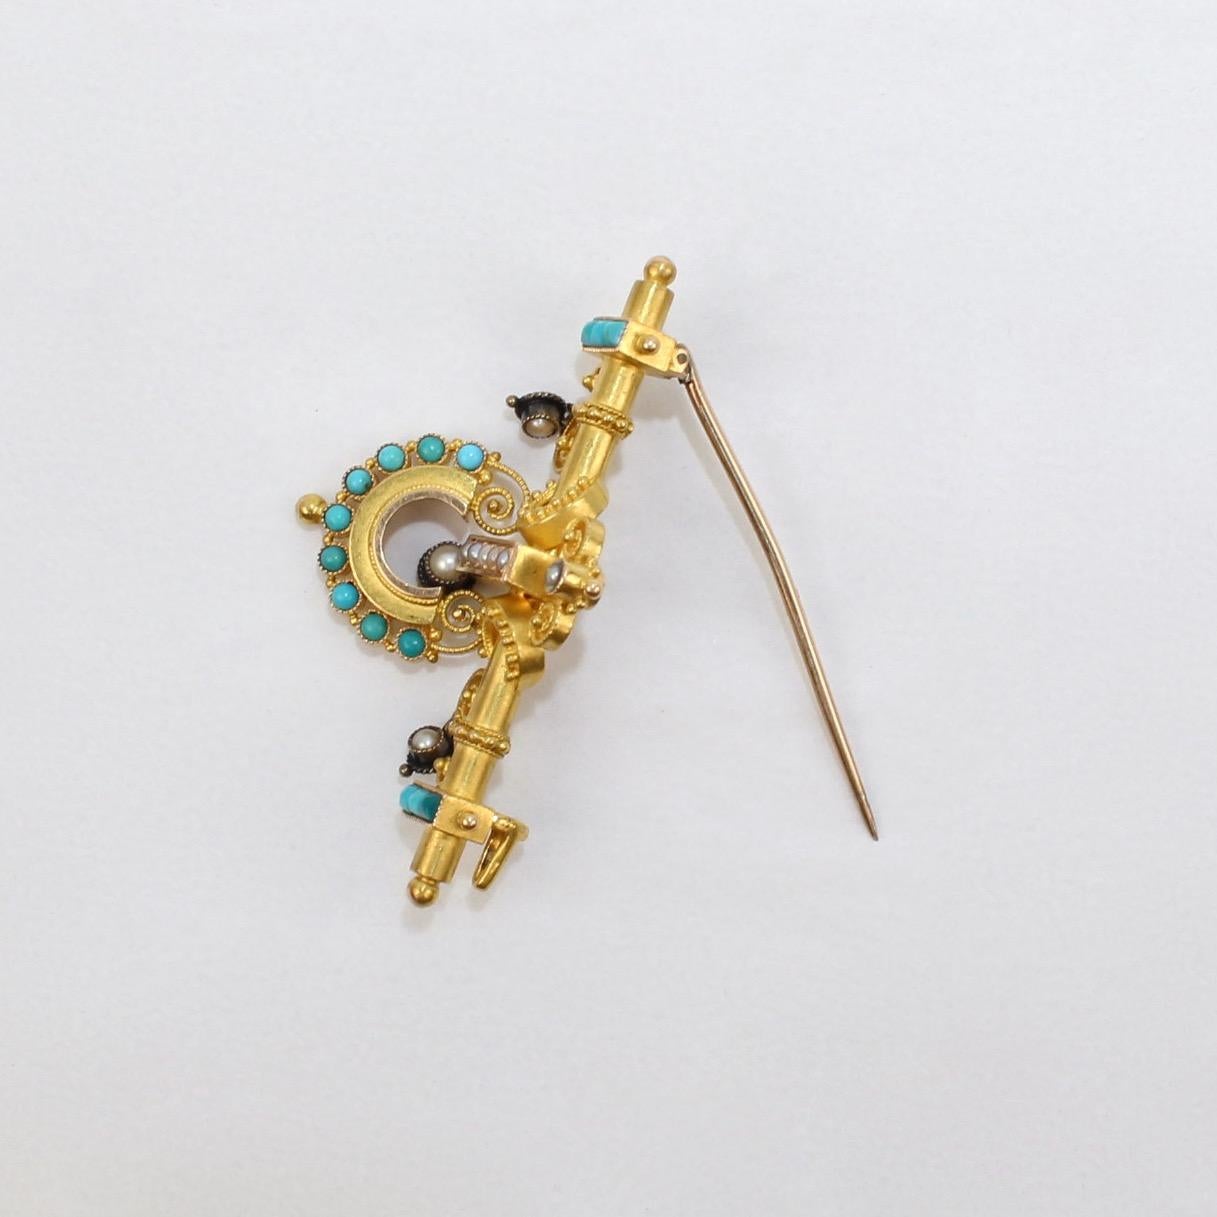 Victorian Etruscan Revival 14 Karat Gold, Turquoise and Pearl Brooch or Pin In Good Condition For Sale In Philadelphia, PA